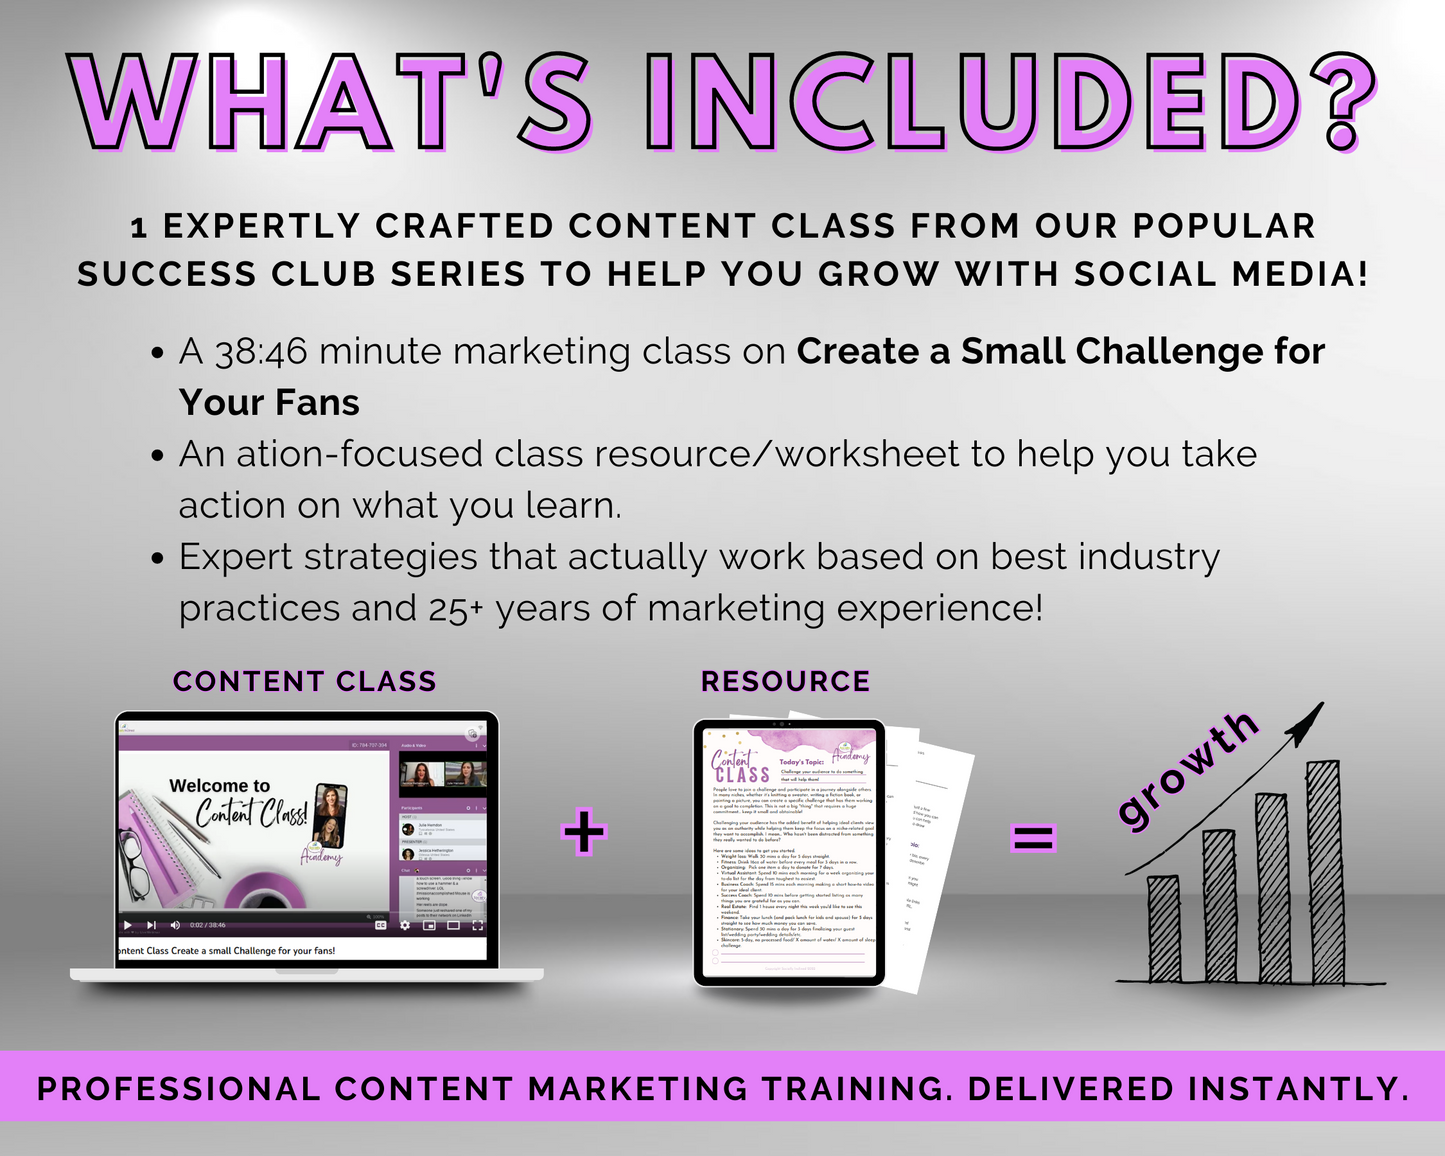 Content Class - Create a Small Challenge for Your Fans Masterclass